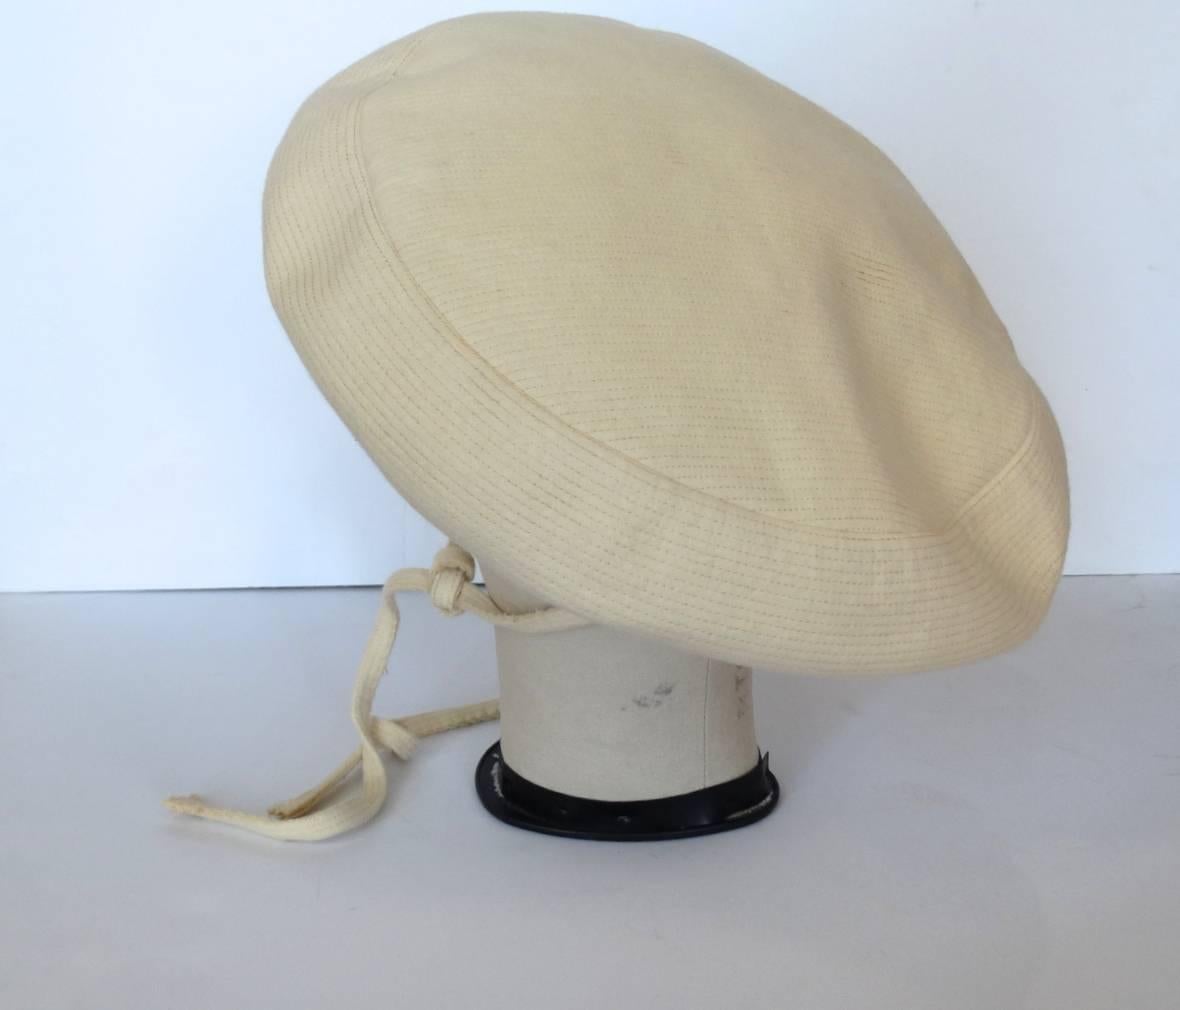 This vintage Yves Saint Laurent cream wool tam style hat, circa late 1960's, is too chic to ignore. This hat features a cream wool exterior along with cream pin stripe top stitch detail, Wide flat top/brim, and Two long wool ties with fringed ends